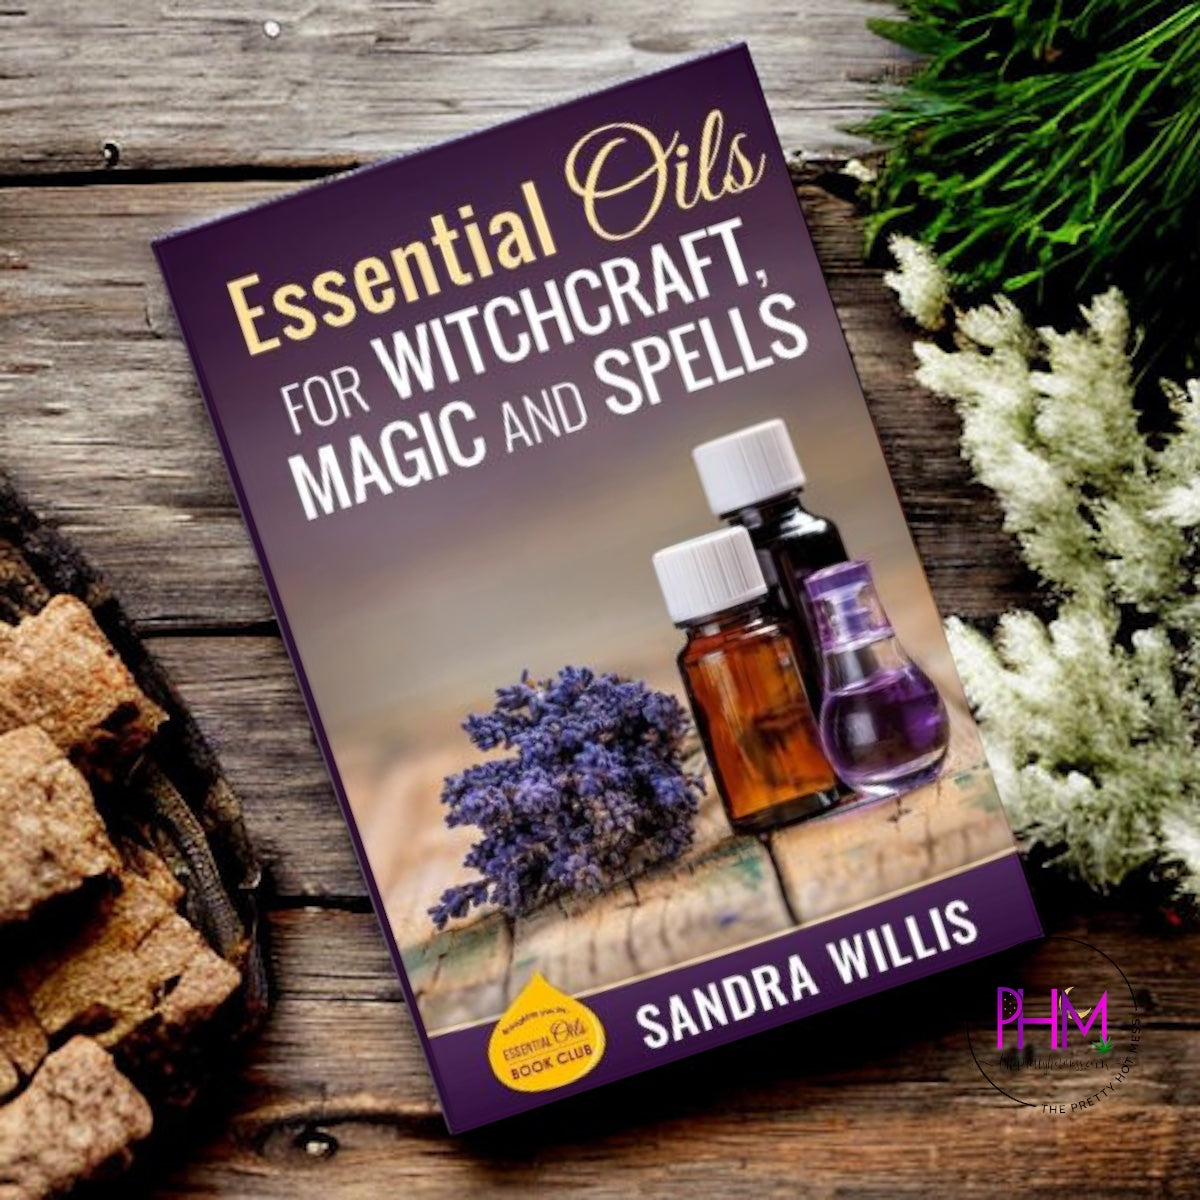 Essential Oils for Witchcraft Magic and Spells